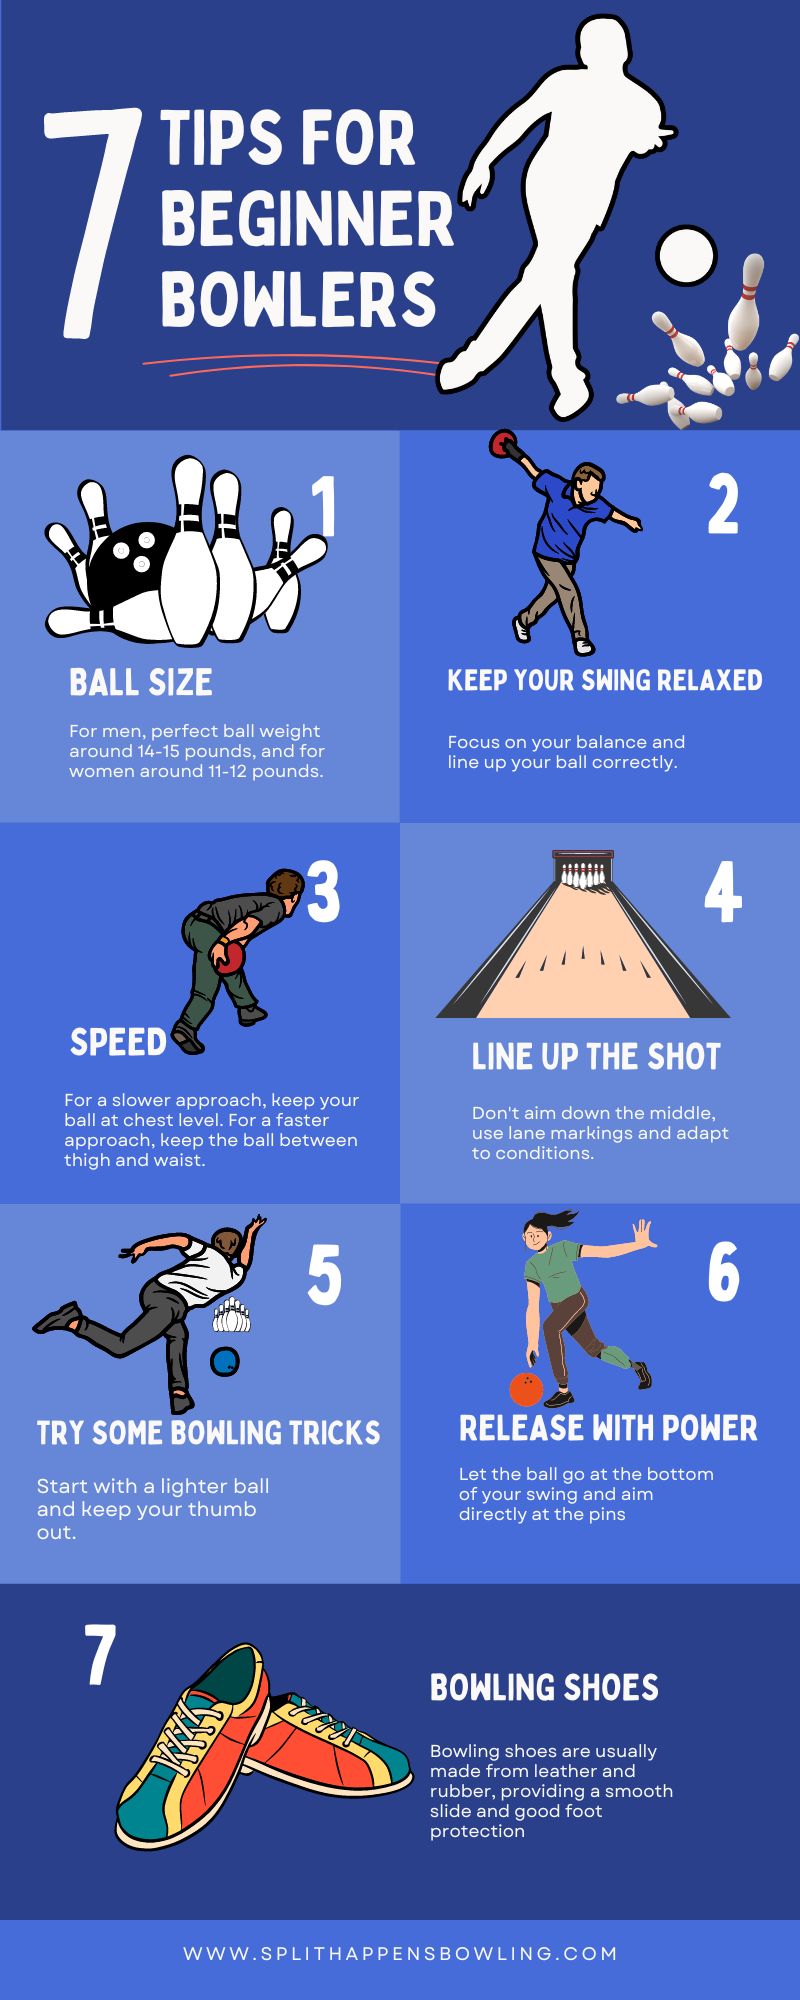 Bowling tips for Beginners